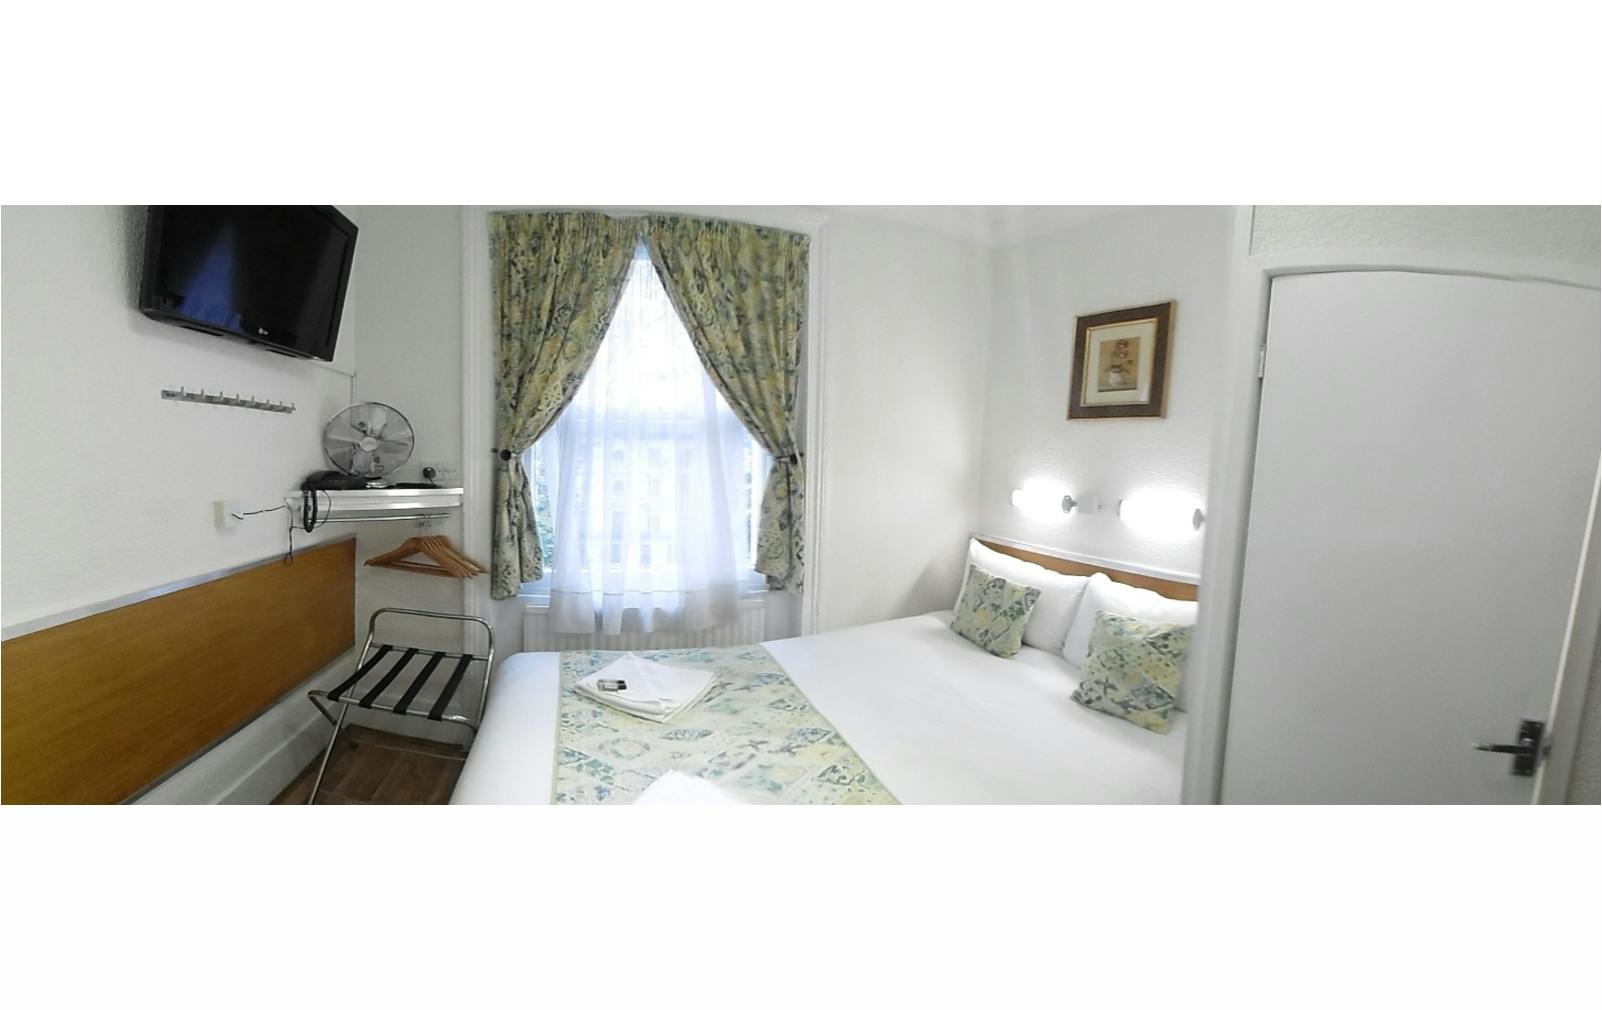 Hotel central London B&B Accommodation double ensuite